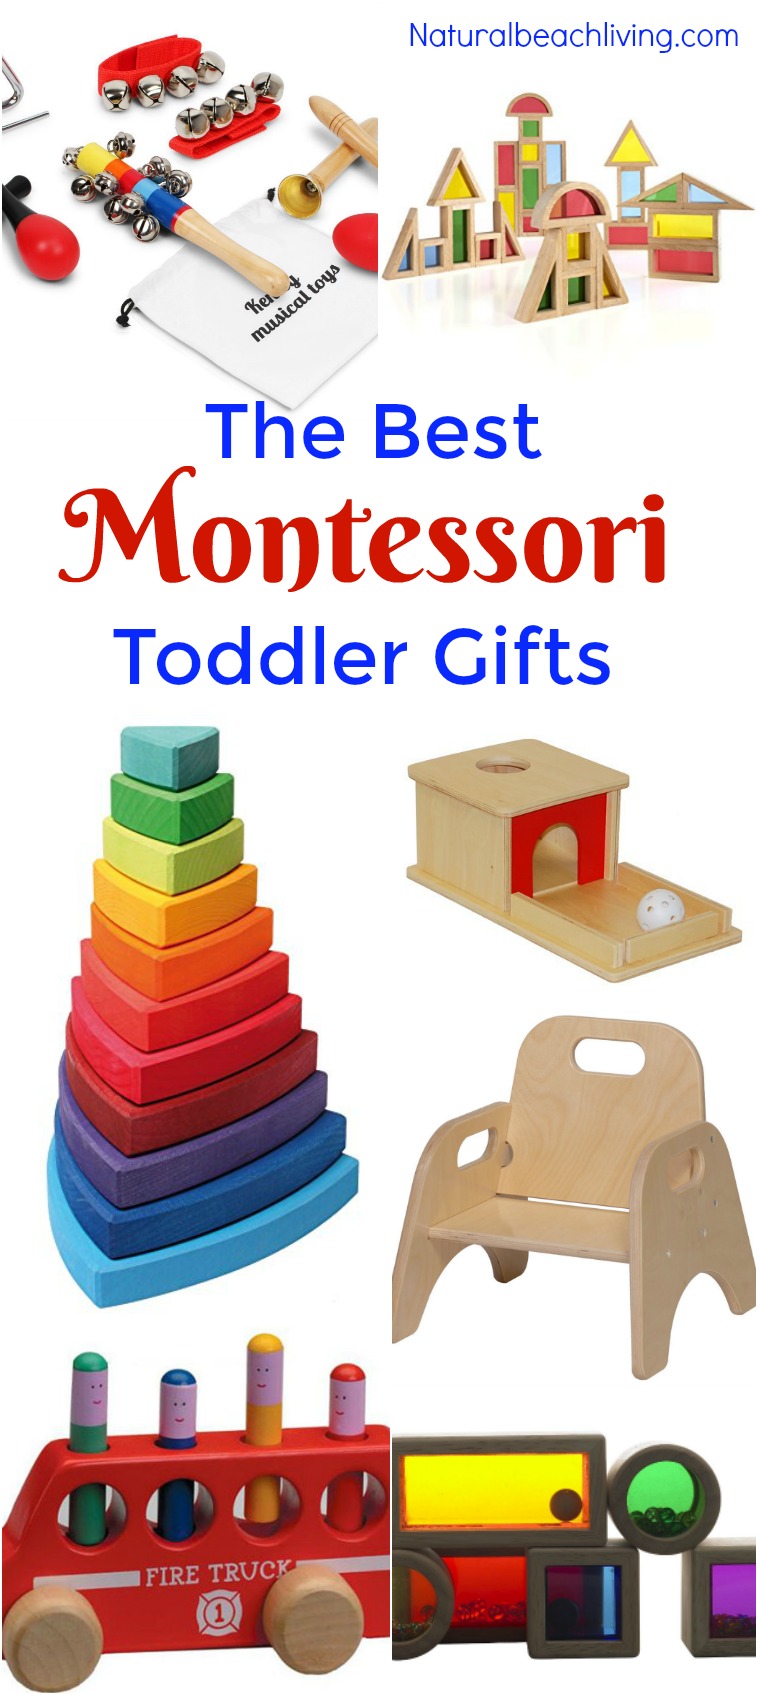 Best Montessori Toys For 1 Year Old - Our Favorite 12-24 Month Activities